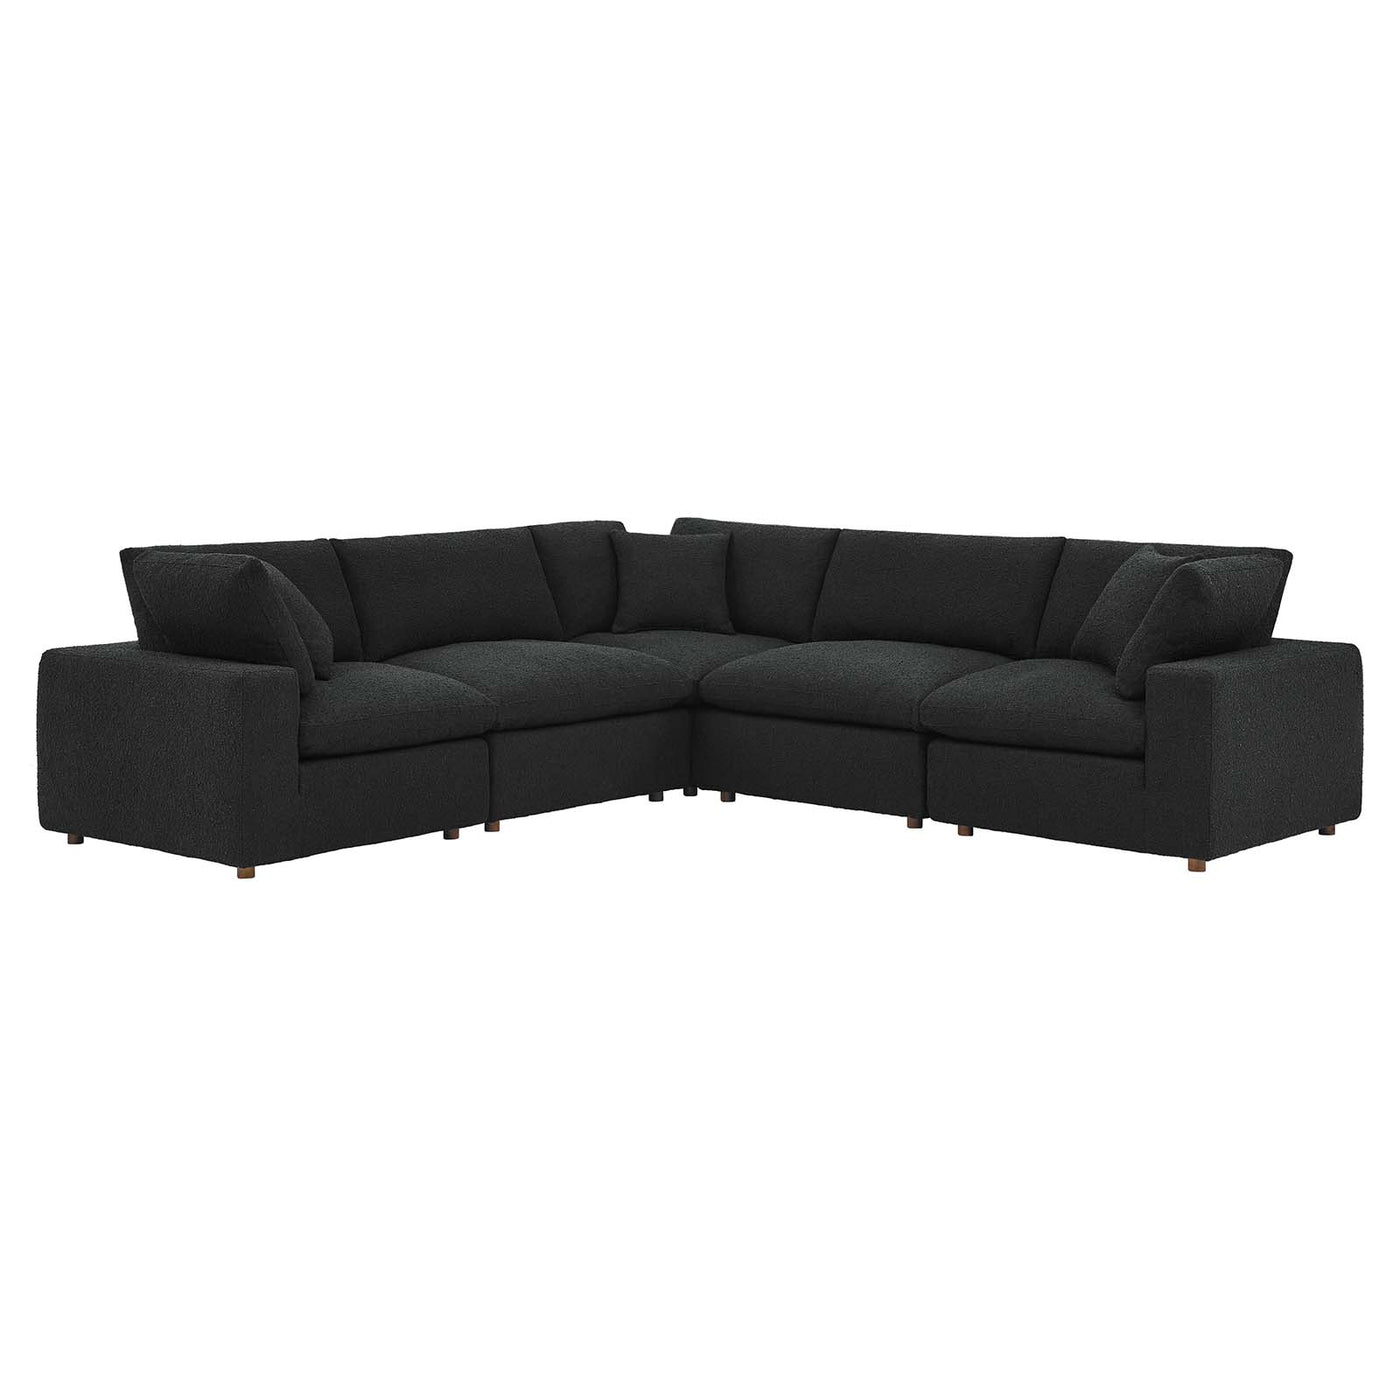 Commix Down Filled Overstuffed Boucle 5-Piece Sectional Sofa